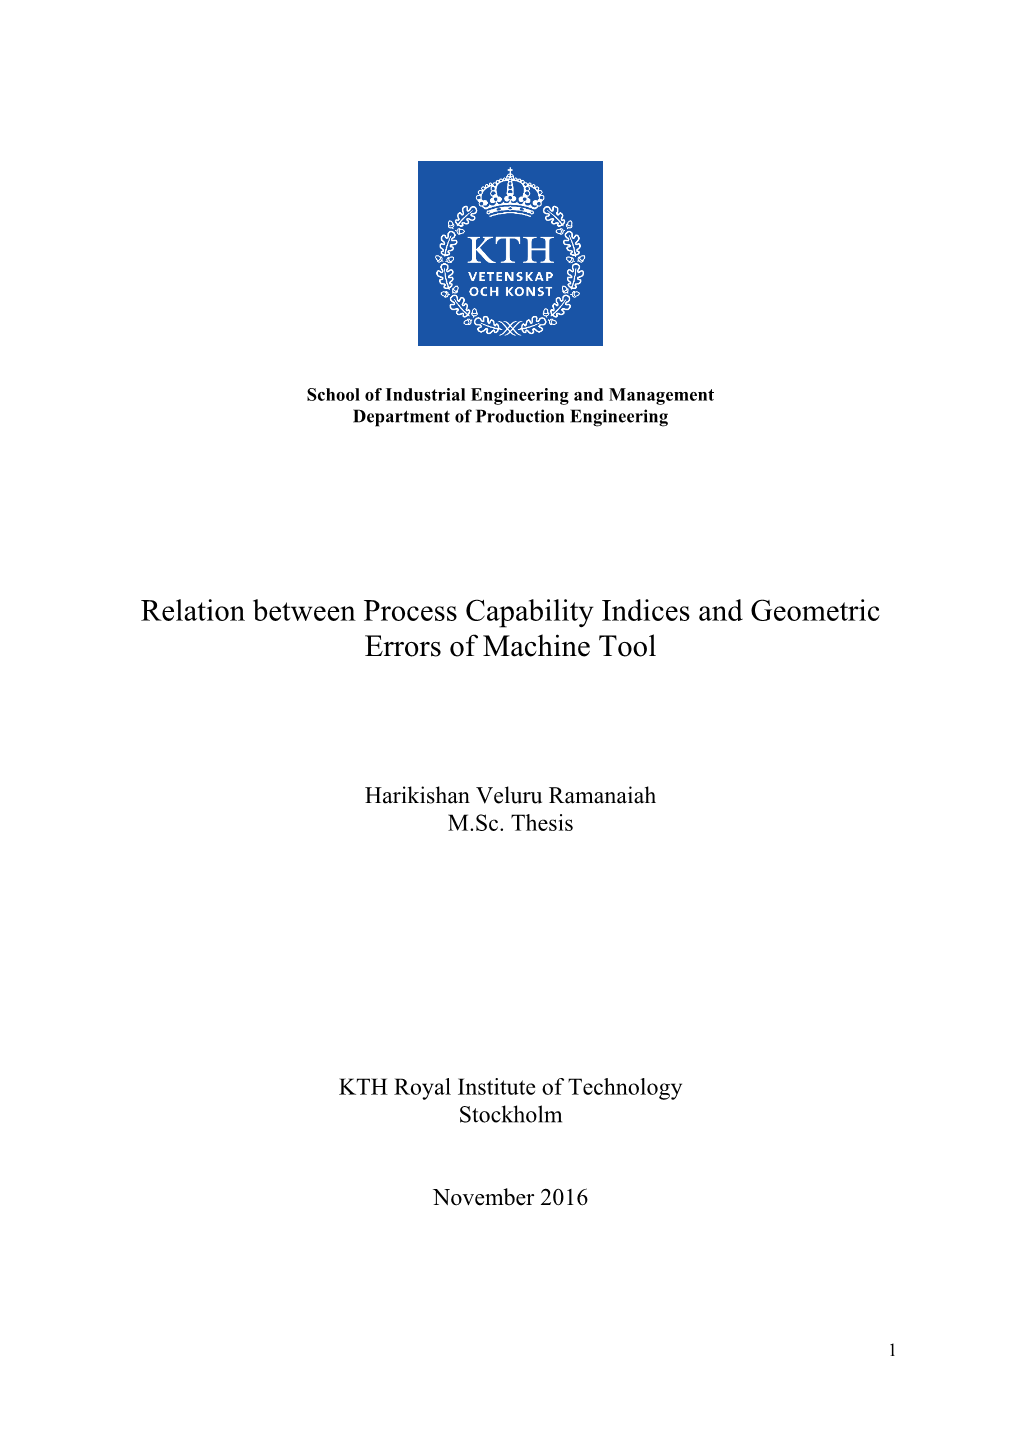 Relation Between Process Capability Indices and Geometric Errors of Machine Tool